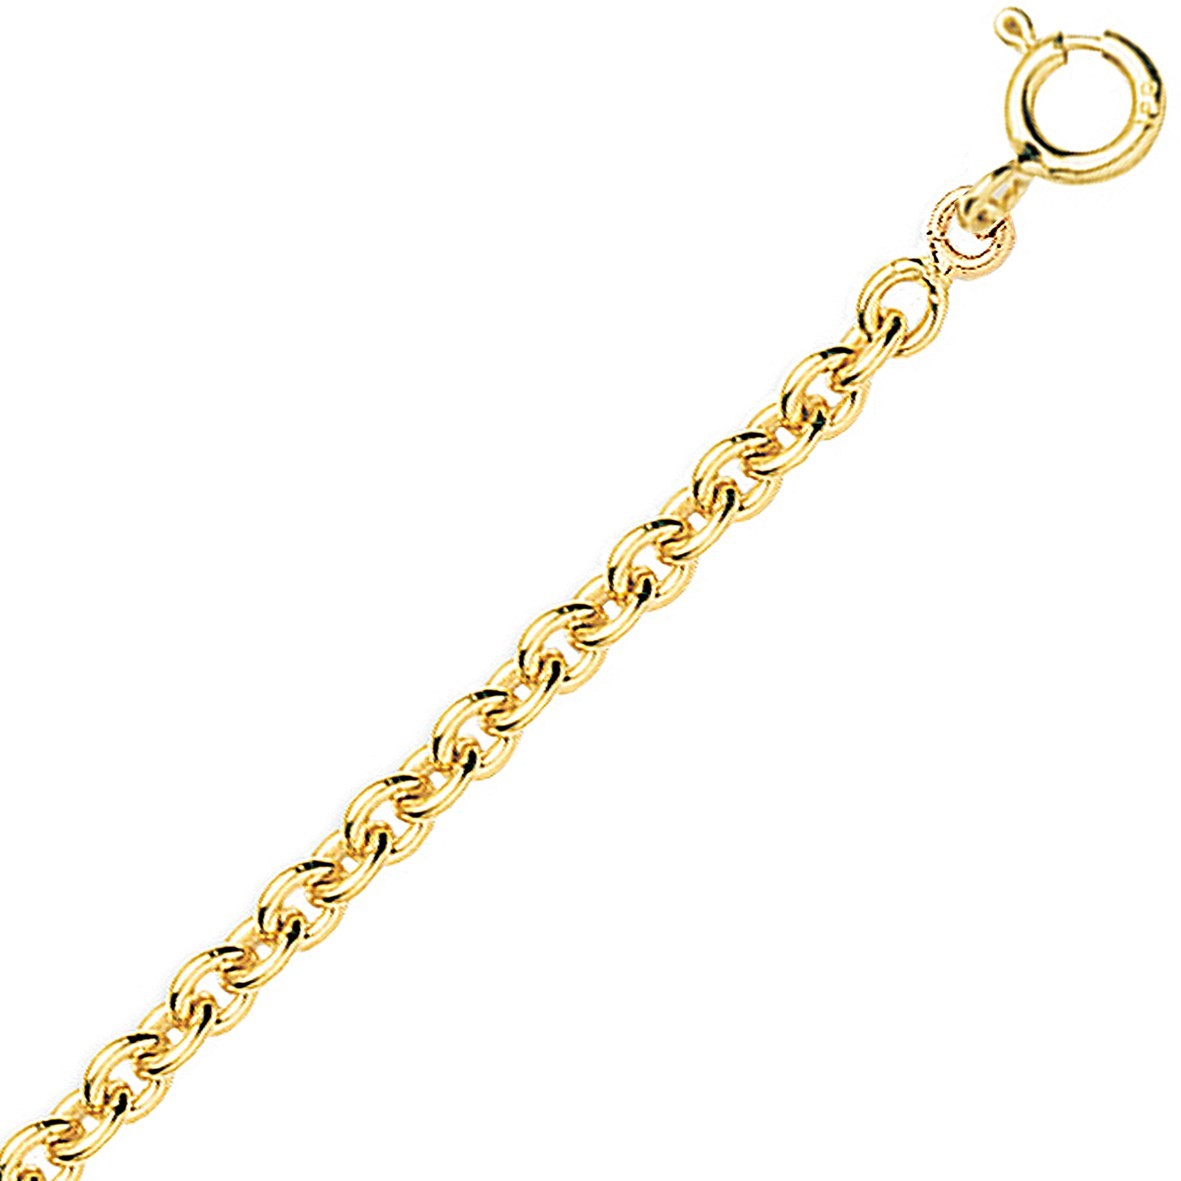 Chaine or jaune 18k maille forçat ronde 1,45mm